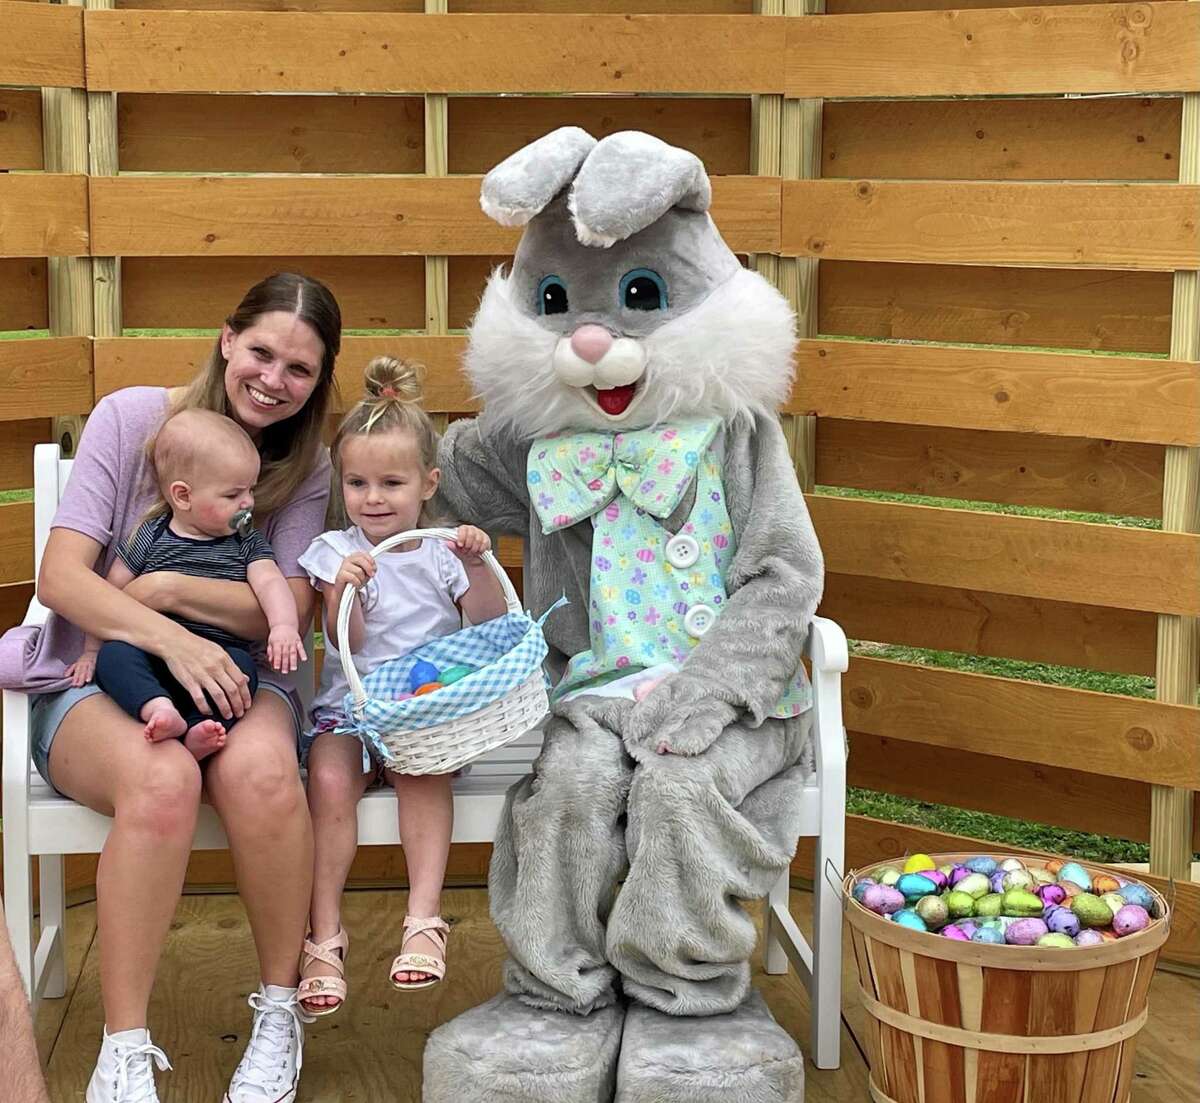 Join in April 1 for the City of Conroe’s annual Morning with Mr. Bunny event. This free event will take place at the Carl Barton Jr. Park Softball Complex from 10 a.m. until noon.